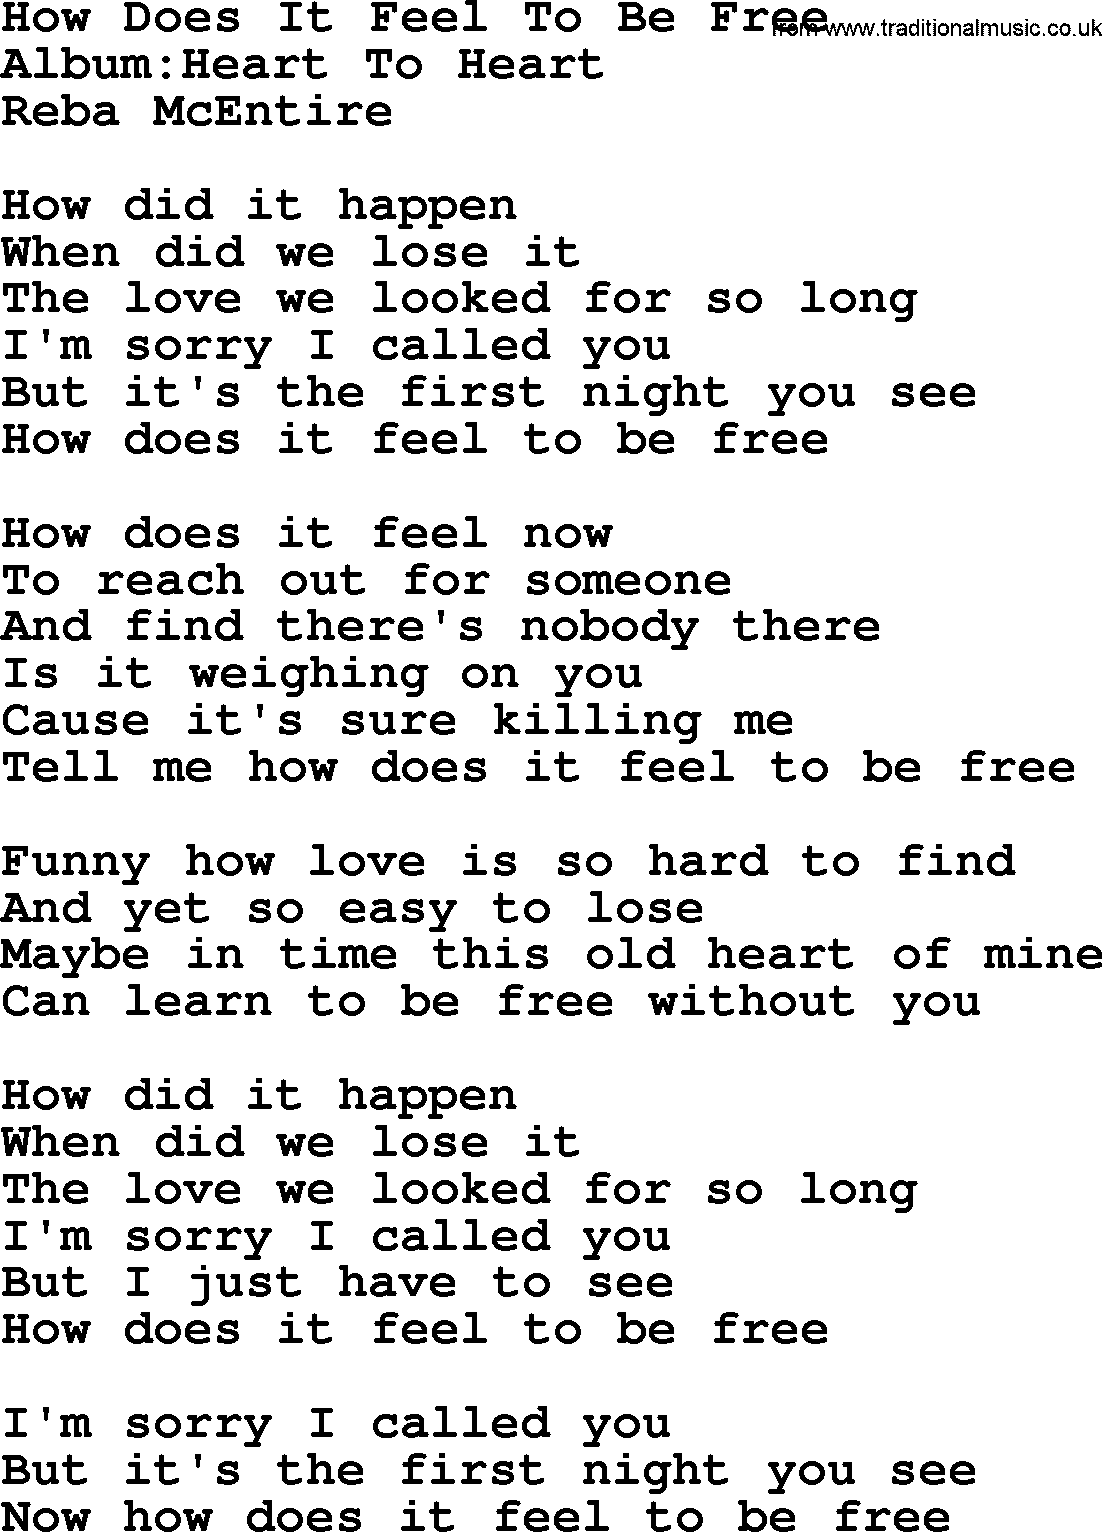 Reba McEntire song: How Does It Feel To Be Free lyrics